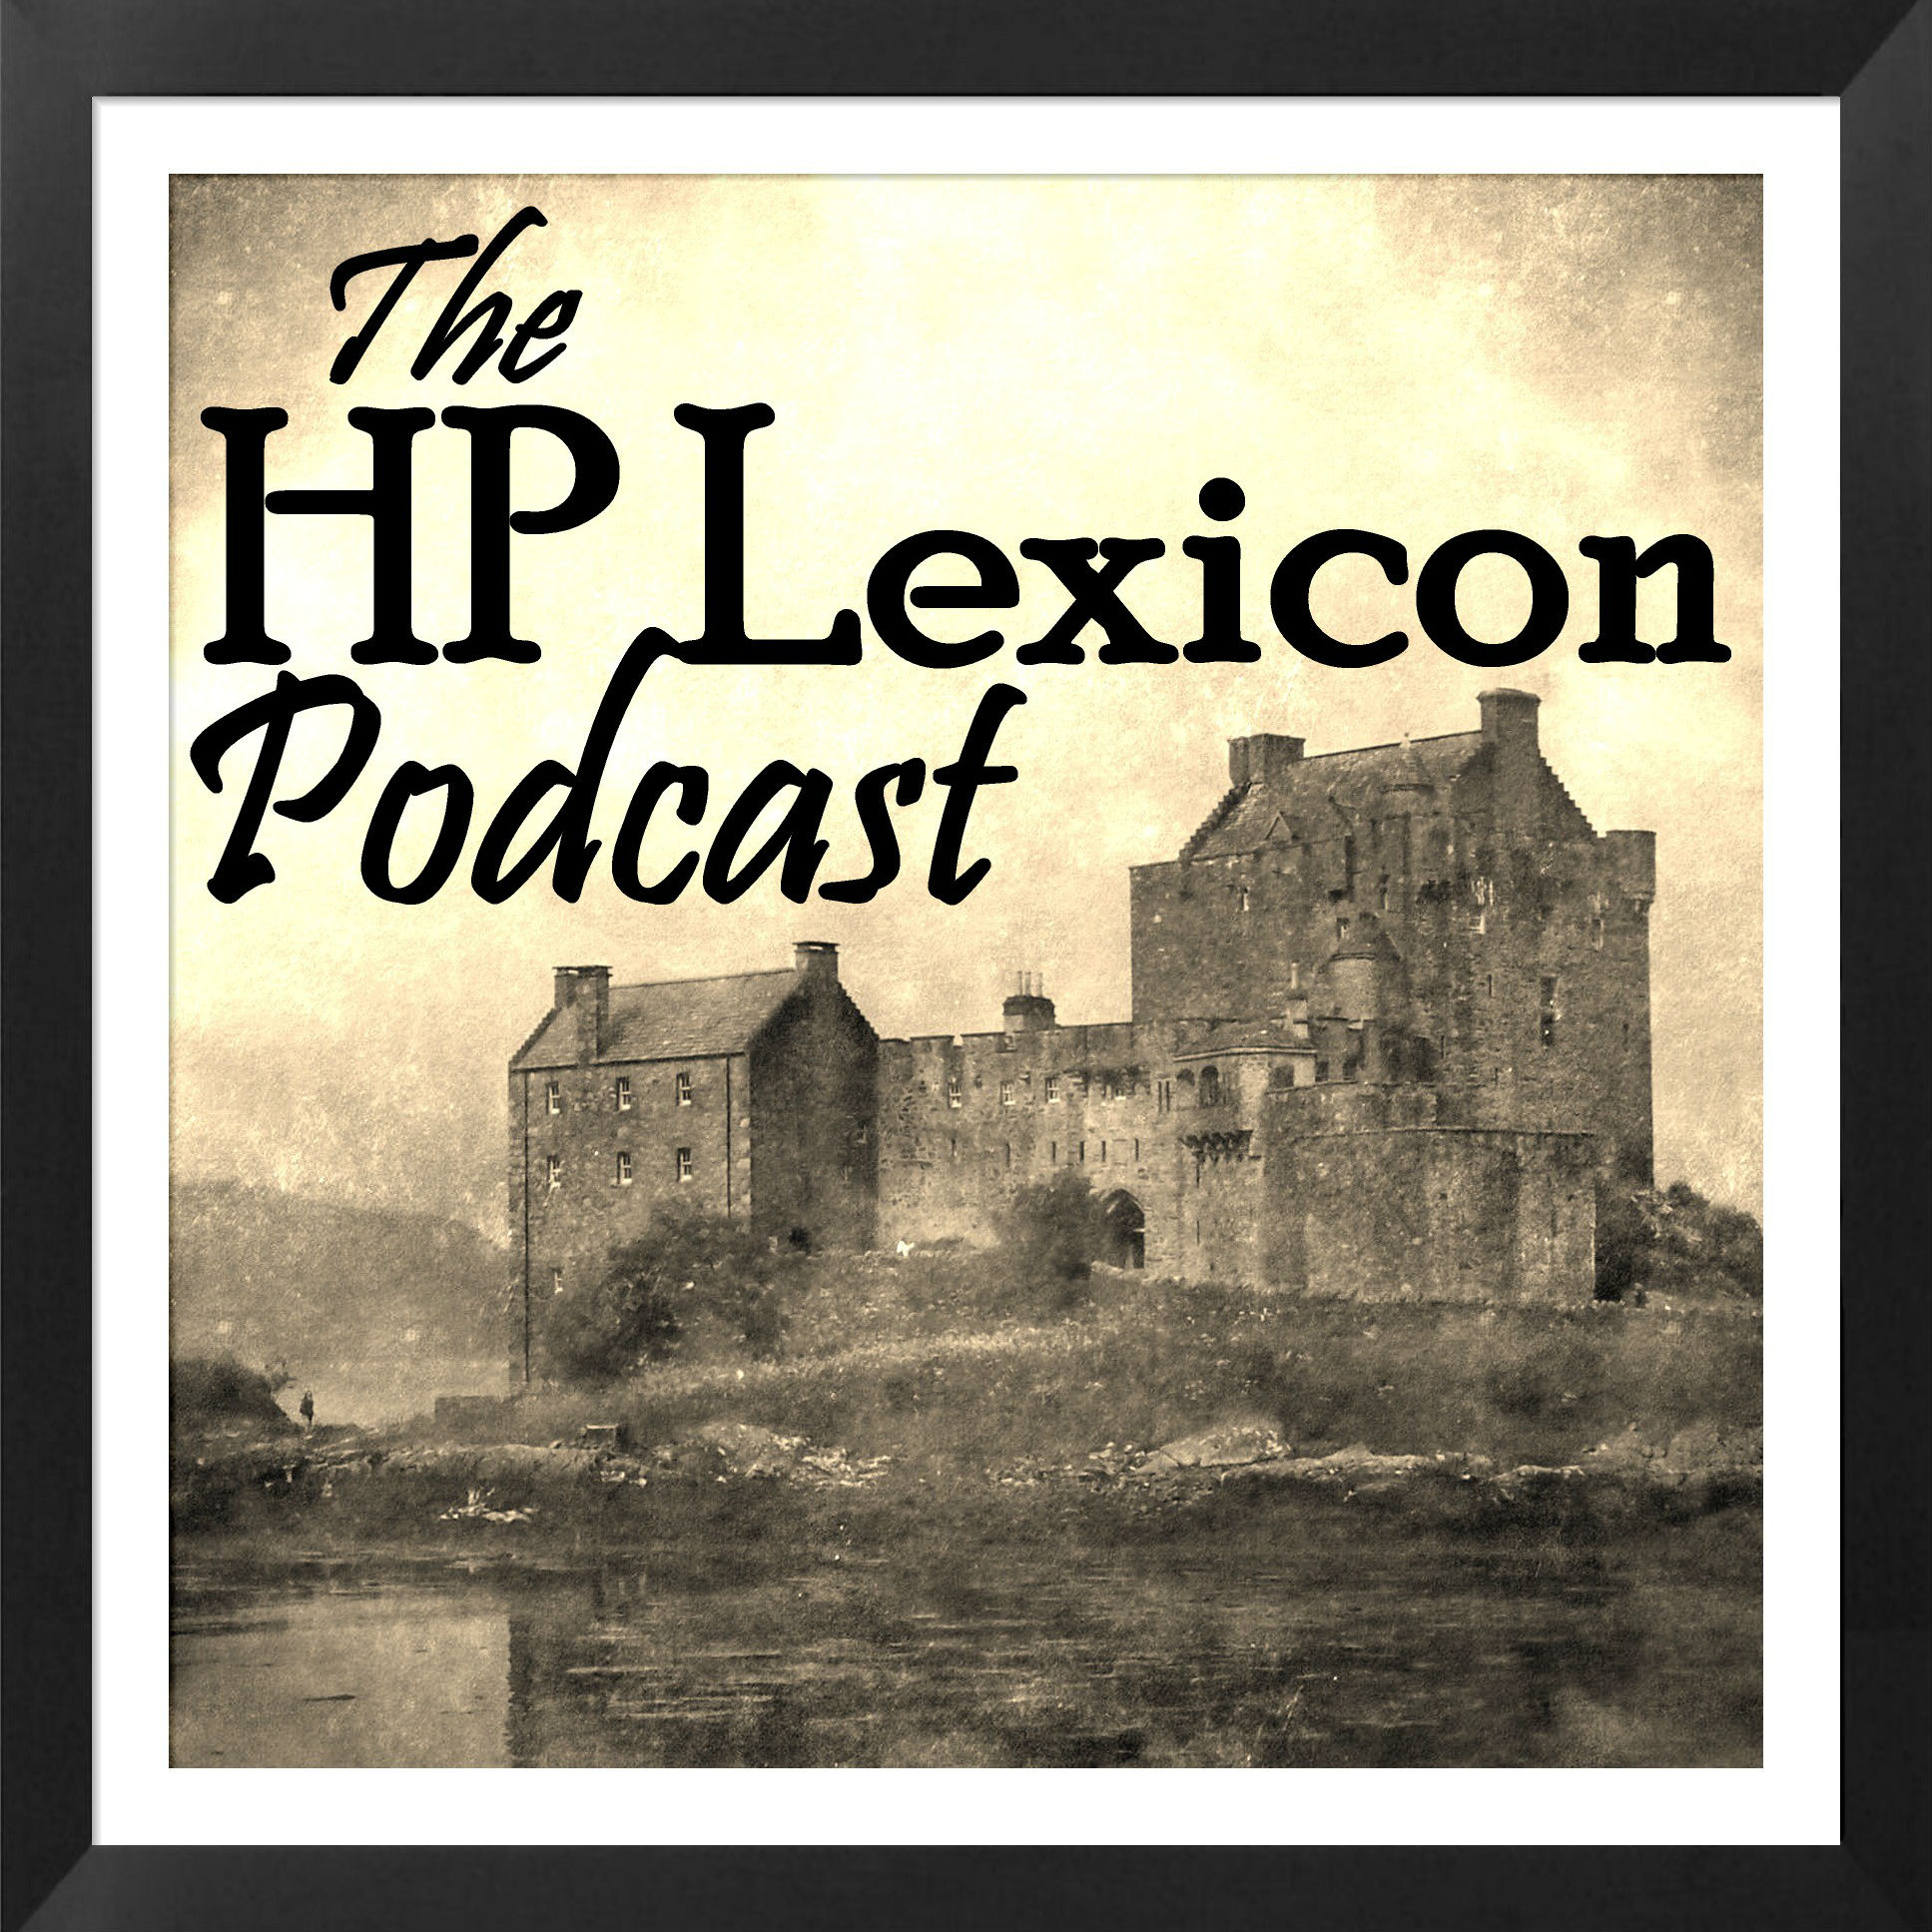 The HP Lexicon Podcast